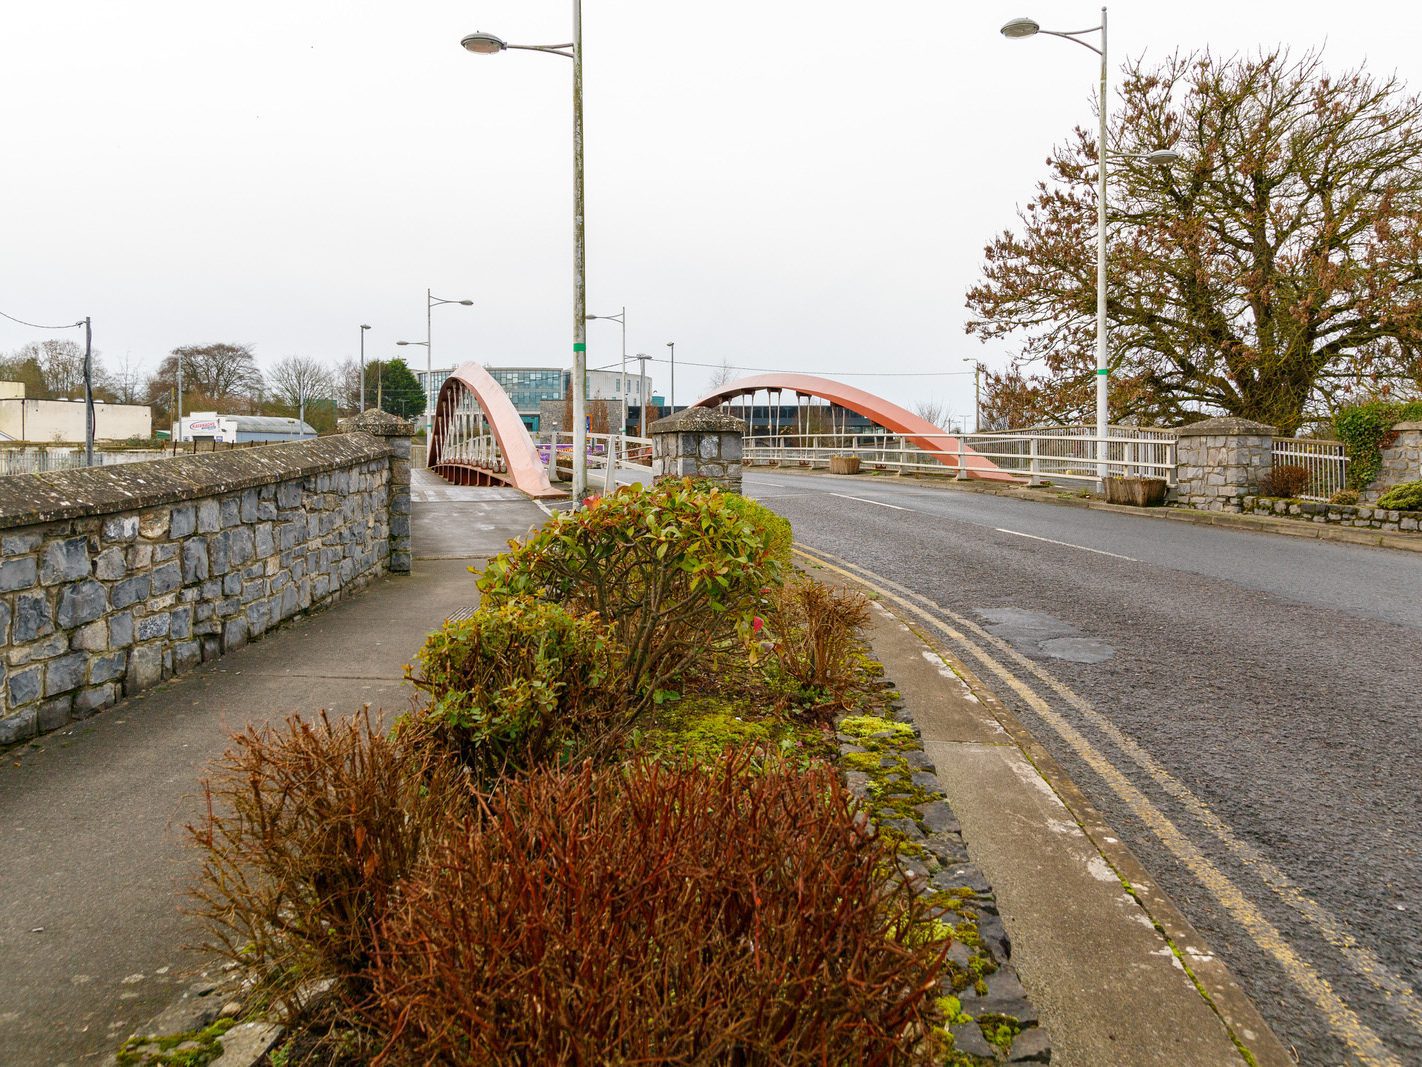 WATERGATE STREET AND WATERGATE BRIDGE [THE TOWN OF TRIM IN COUNTY MEATH]-226457-1